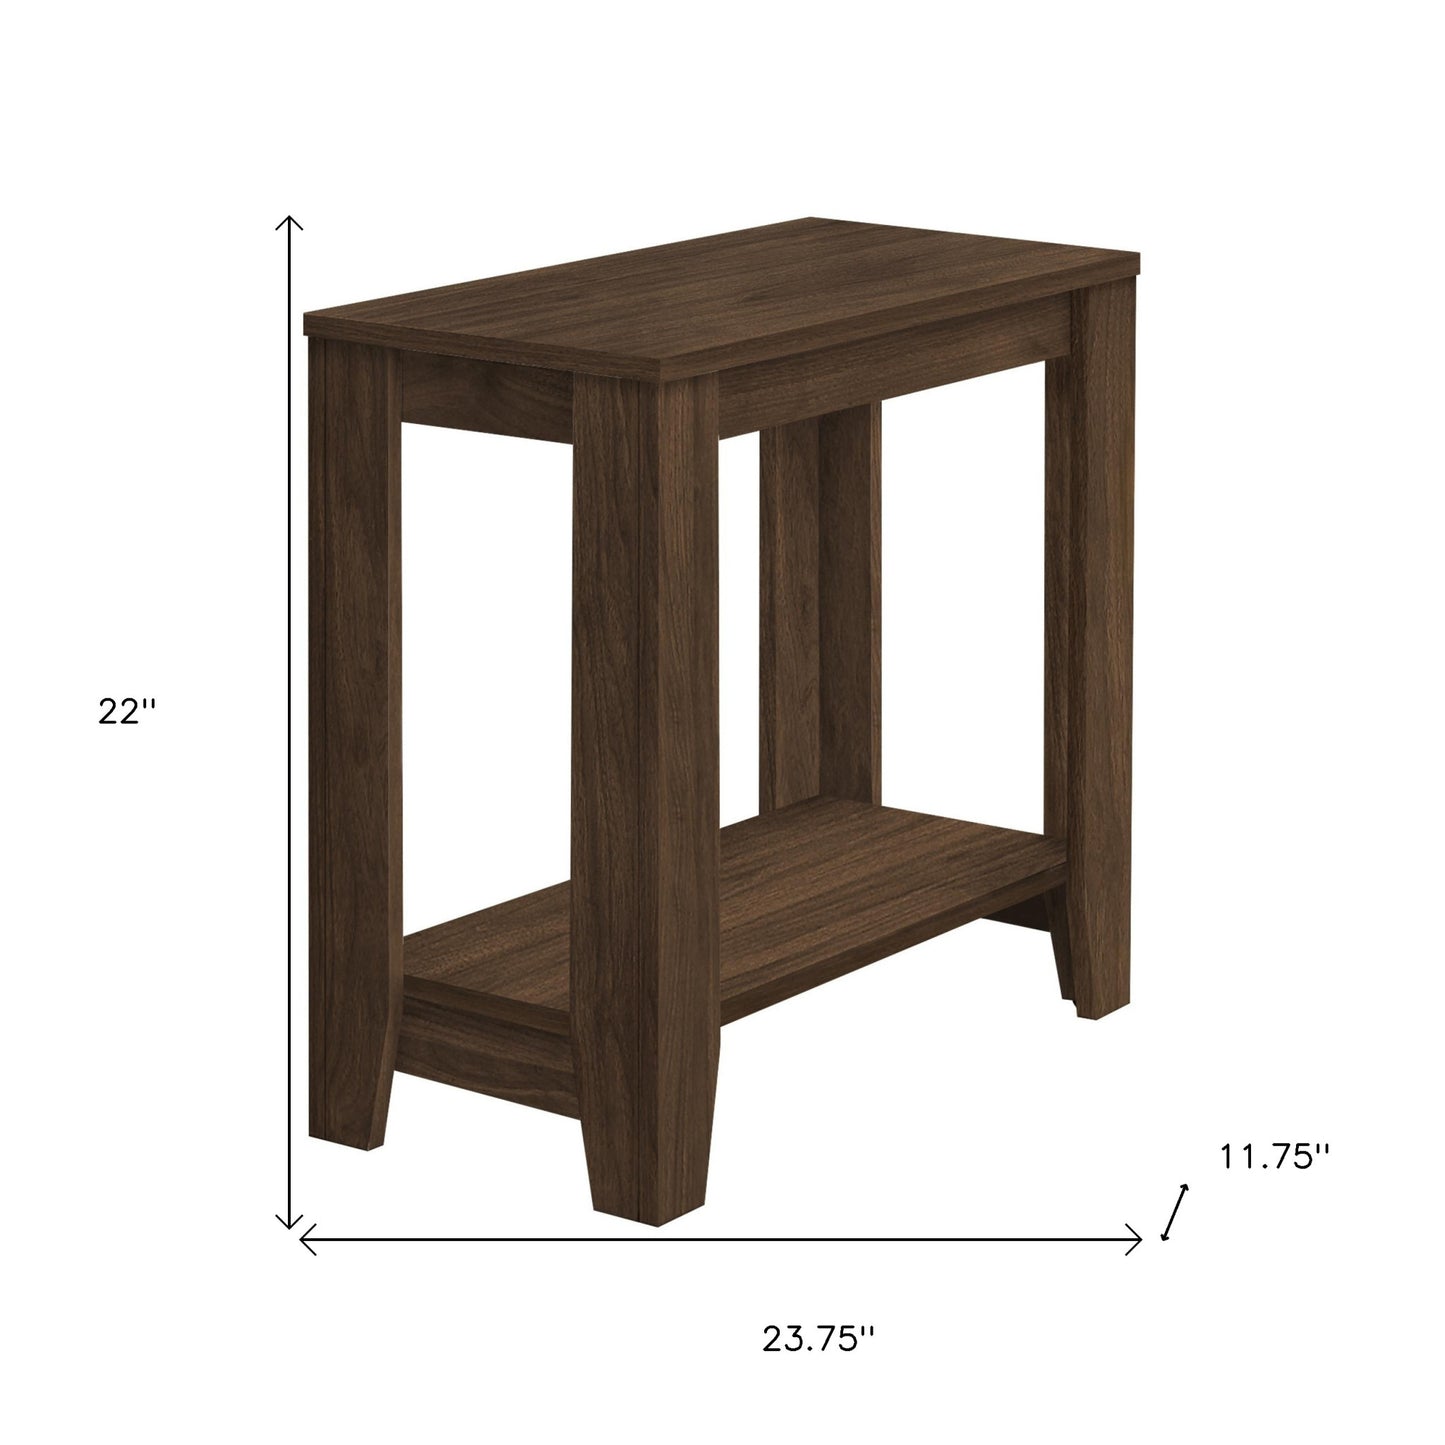 22" Walnut End Table With Shelf By Homeroots